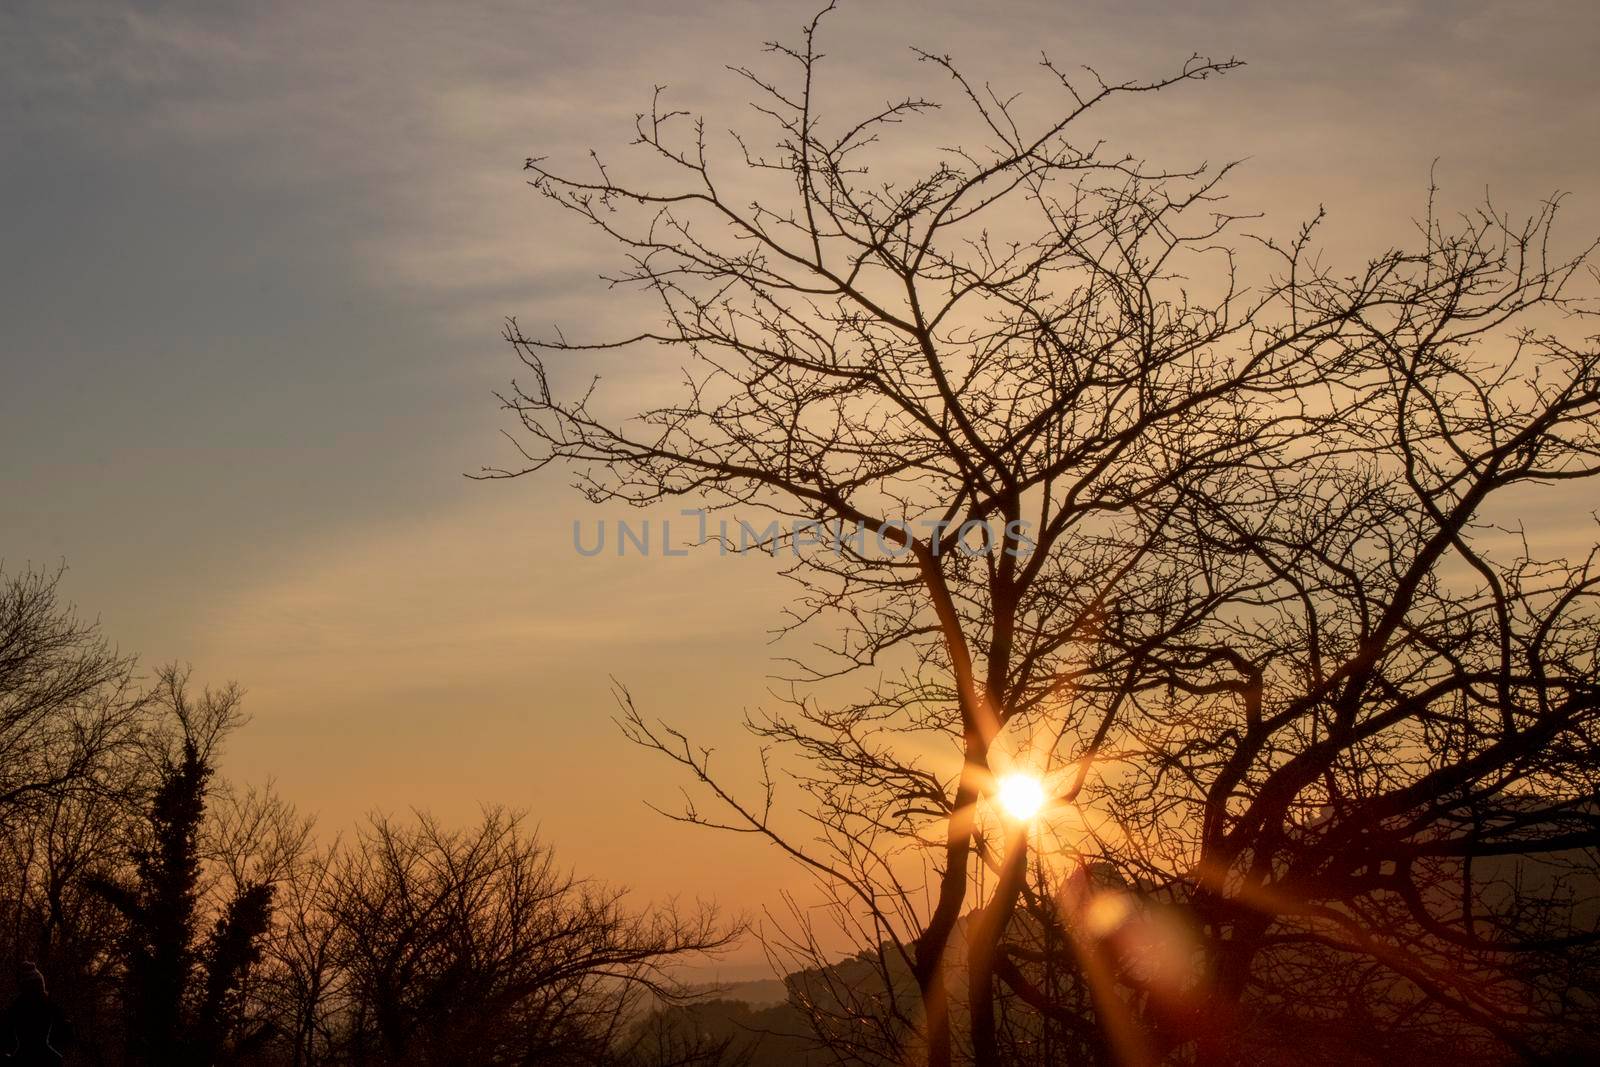 Sunset picture showing a tree silhouette and the sun behind it